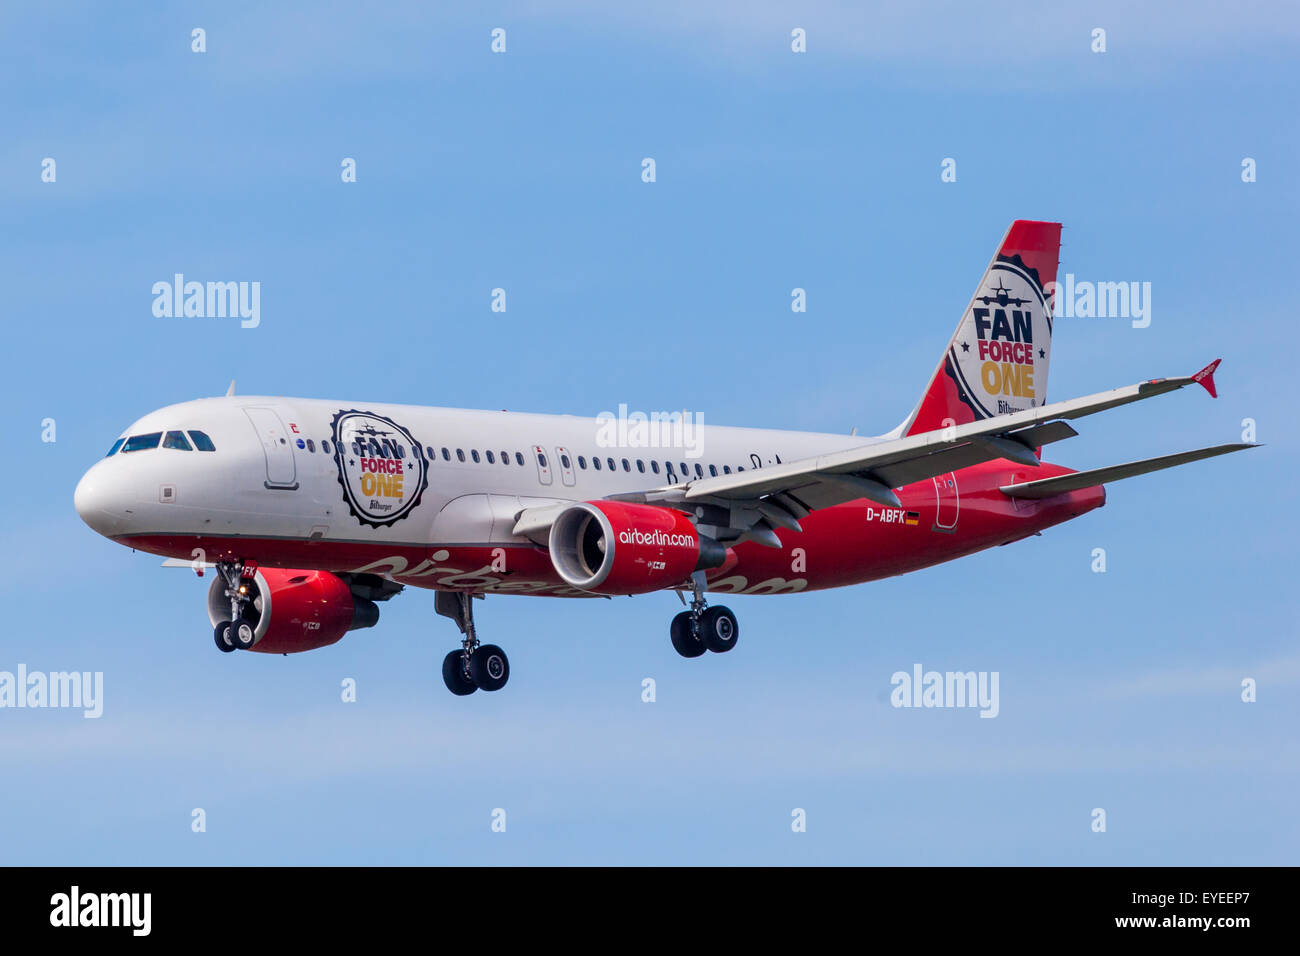 Air Berlin Airbus A320-200 with a Fan Force One painting landing at the Frankfurt International Airport (FRA). July 26, 2015 in Stock Photo